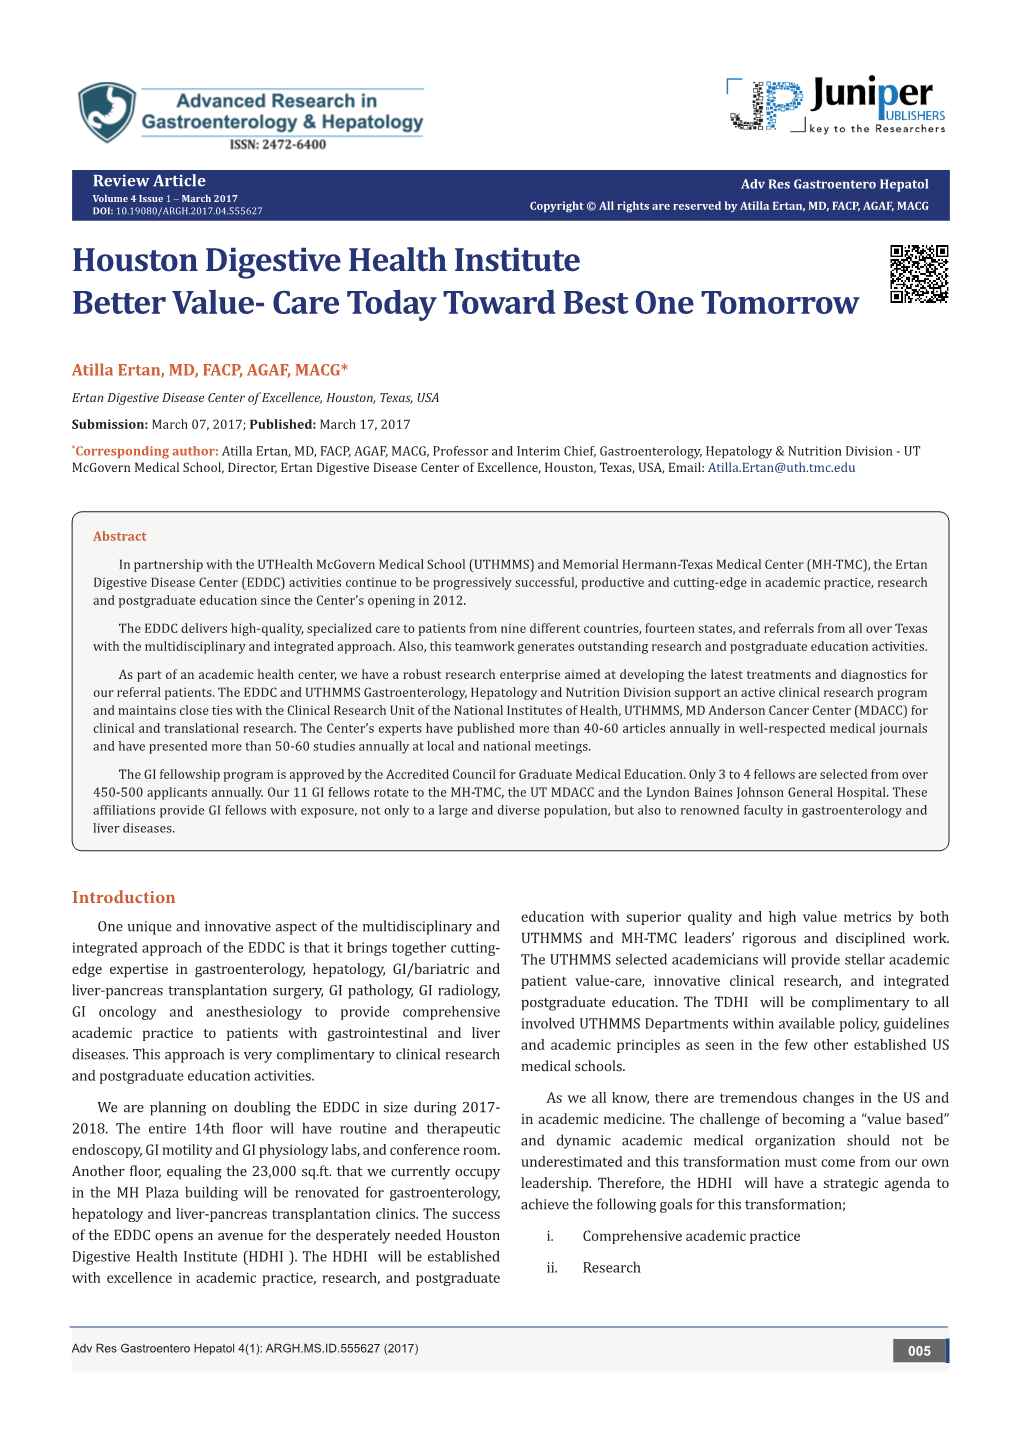 Houston Digestive Health Institute Better Value-Care Today Toward Best One Tomorrow